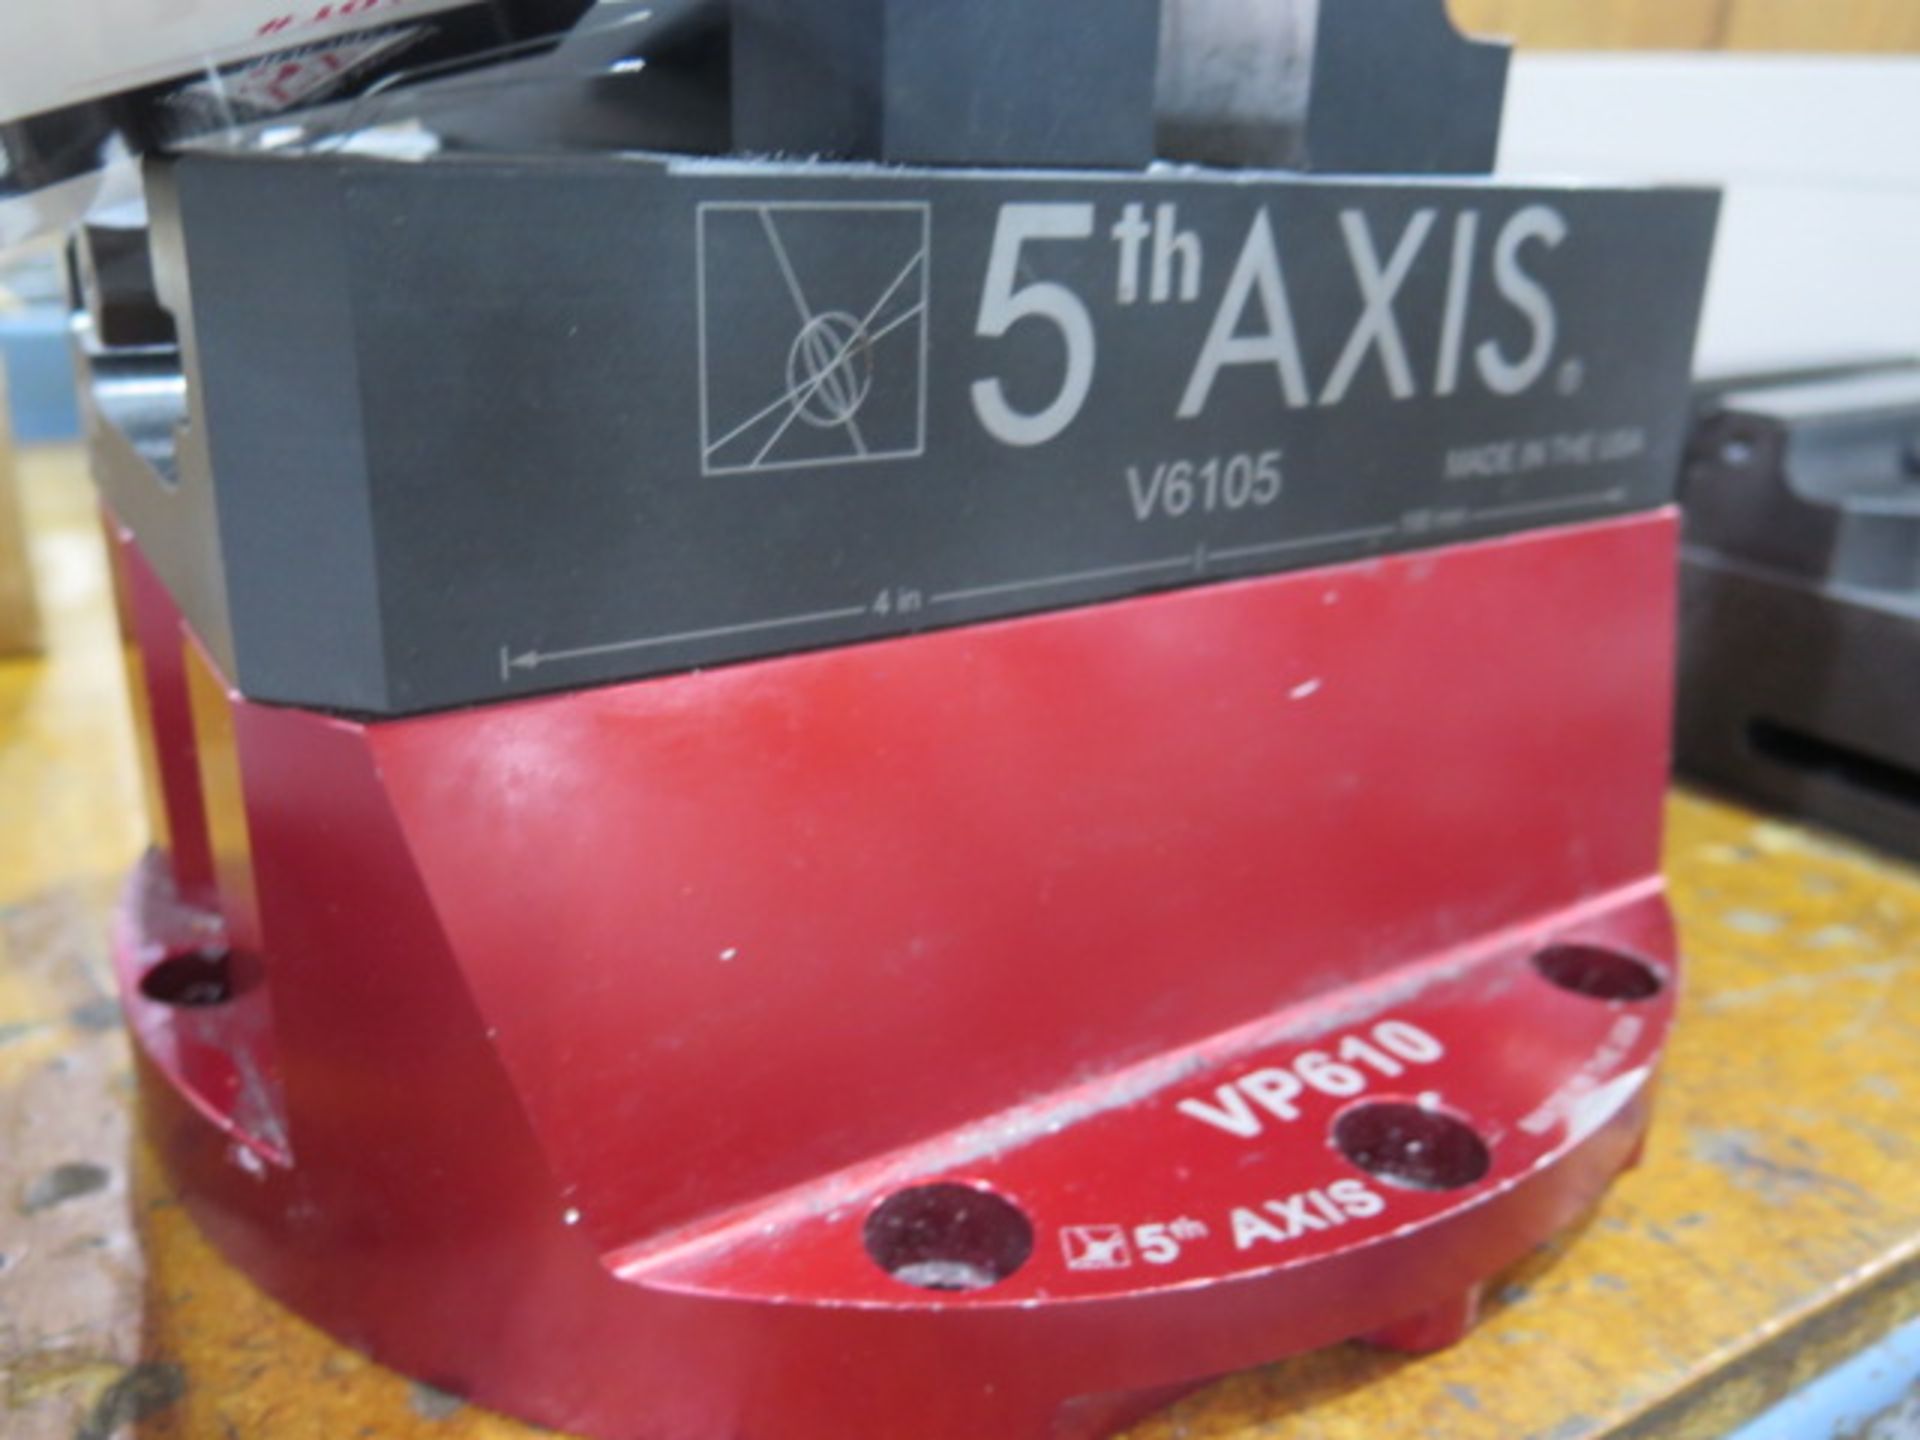 5th Axis V6105 6" Vise w/ VP610 Base Fixture (SOLD AS-IS - NO WARRANTY) - Image 7 of 9